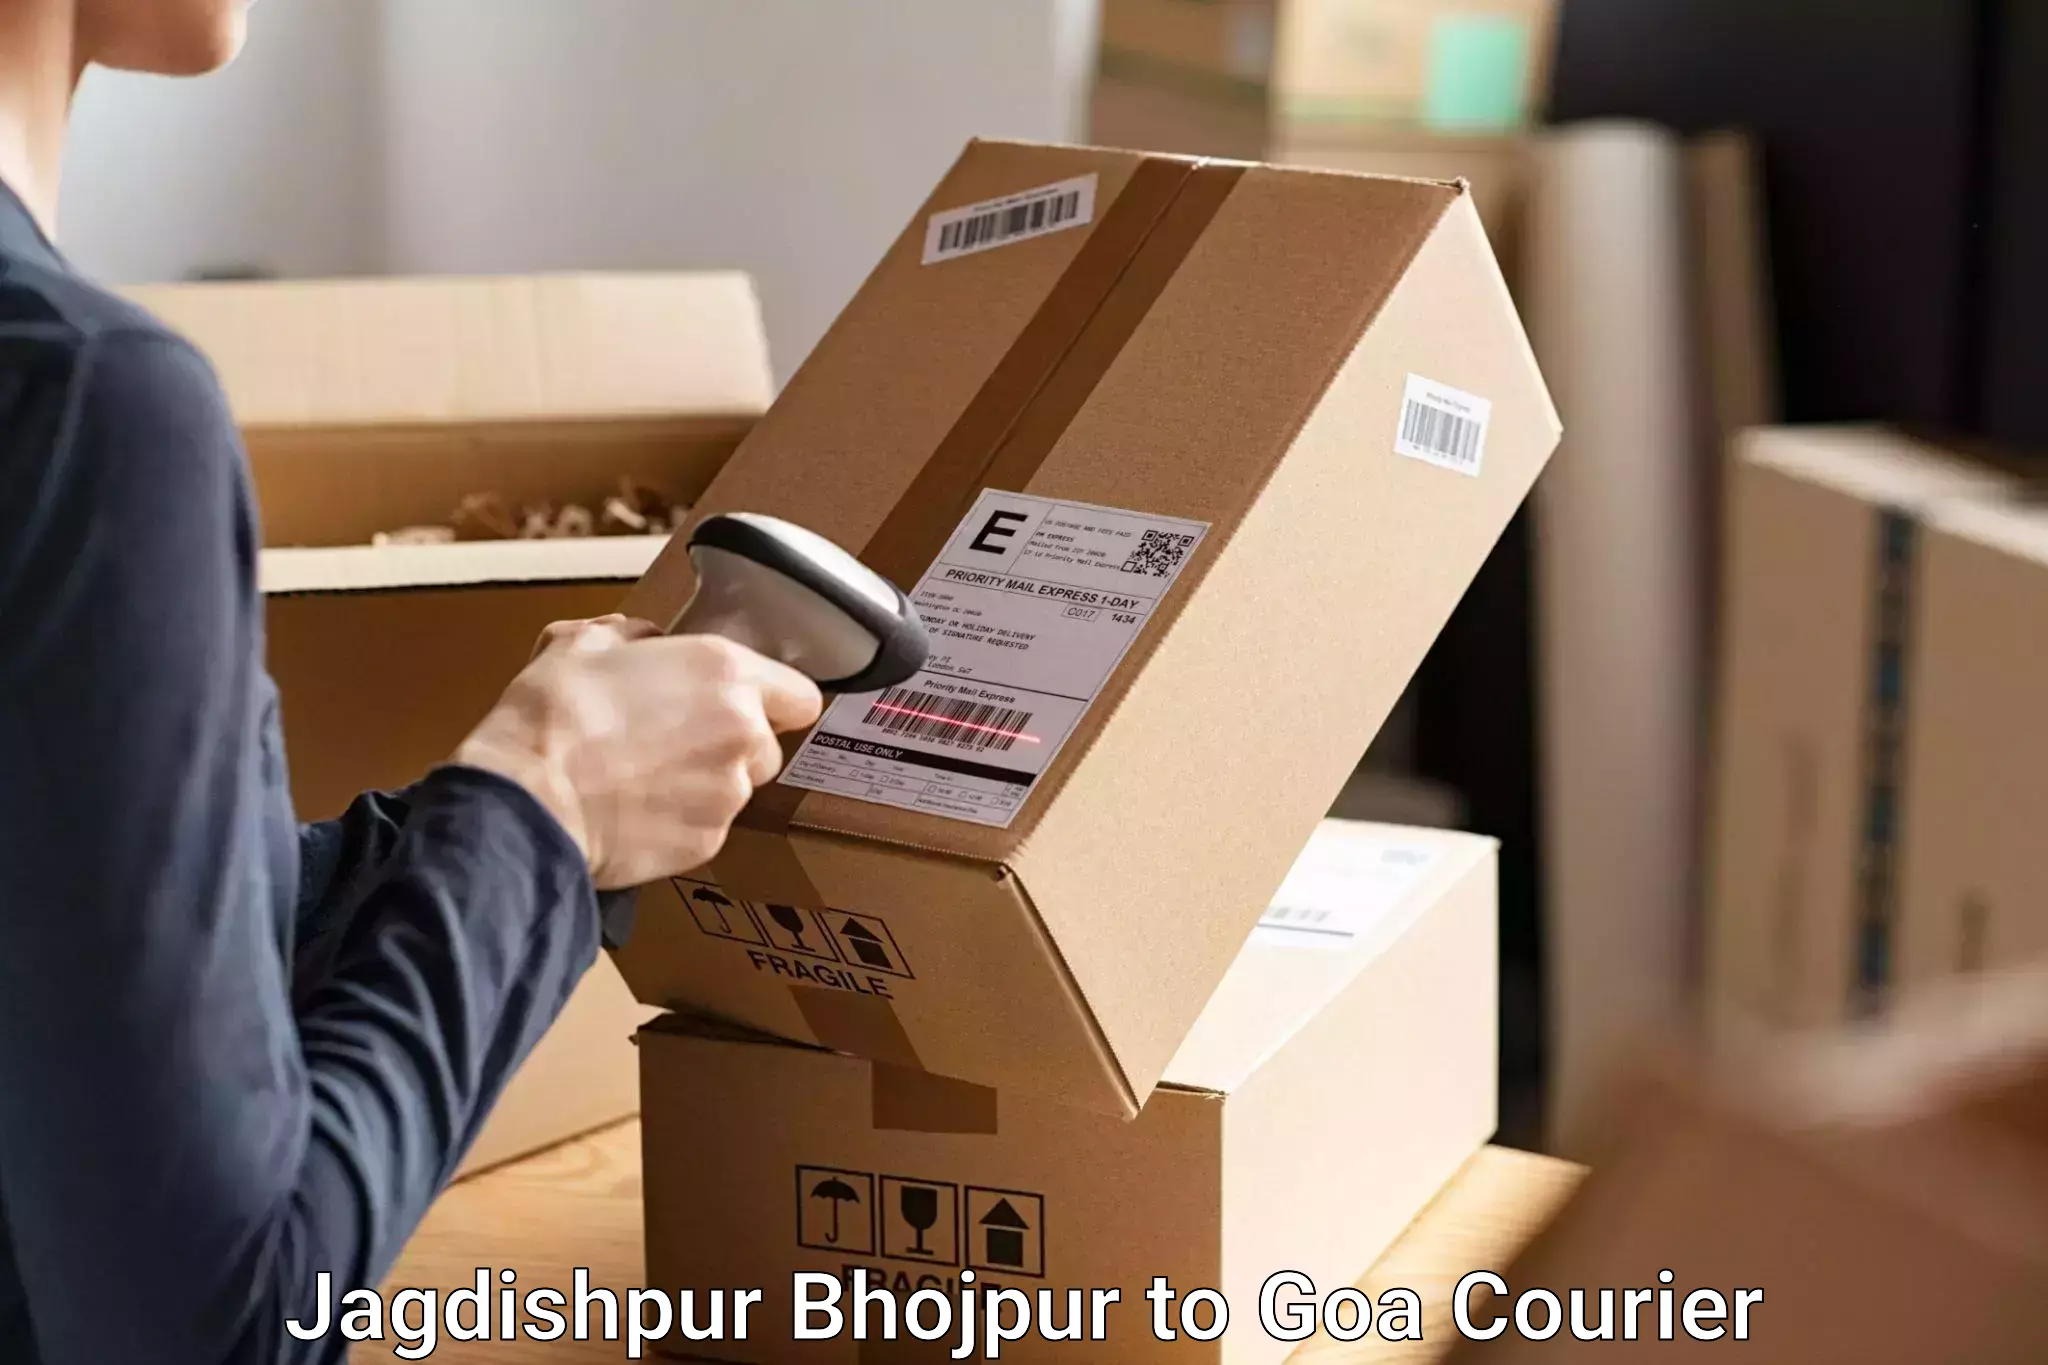 Luggage delivery network Jagdishpur Bhojpur to Goa